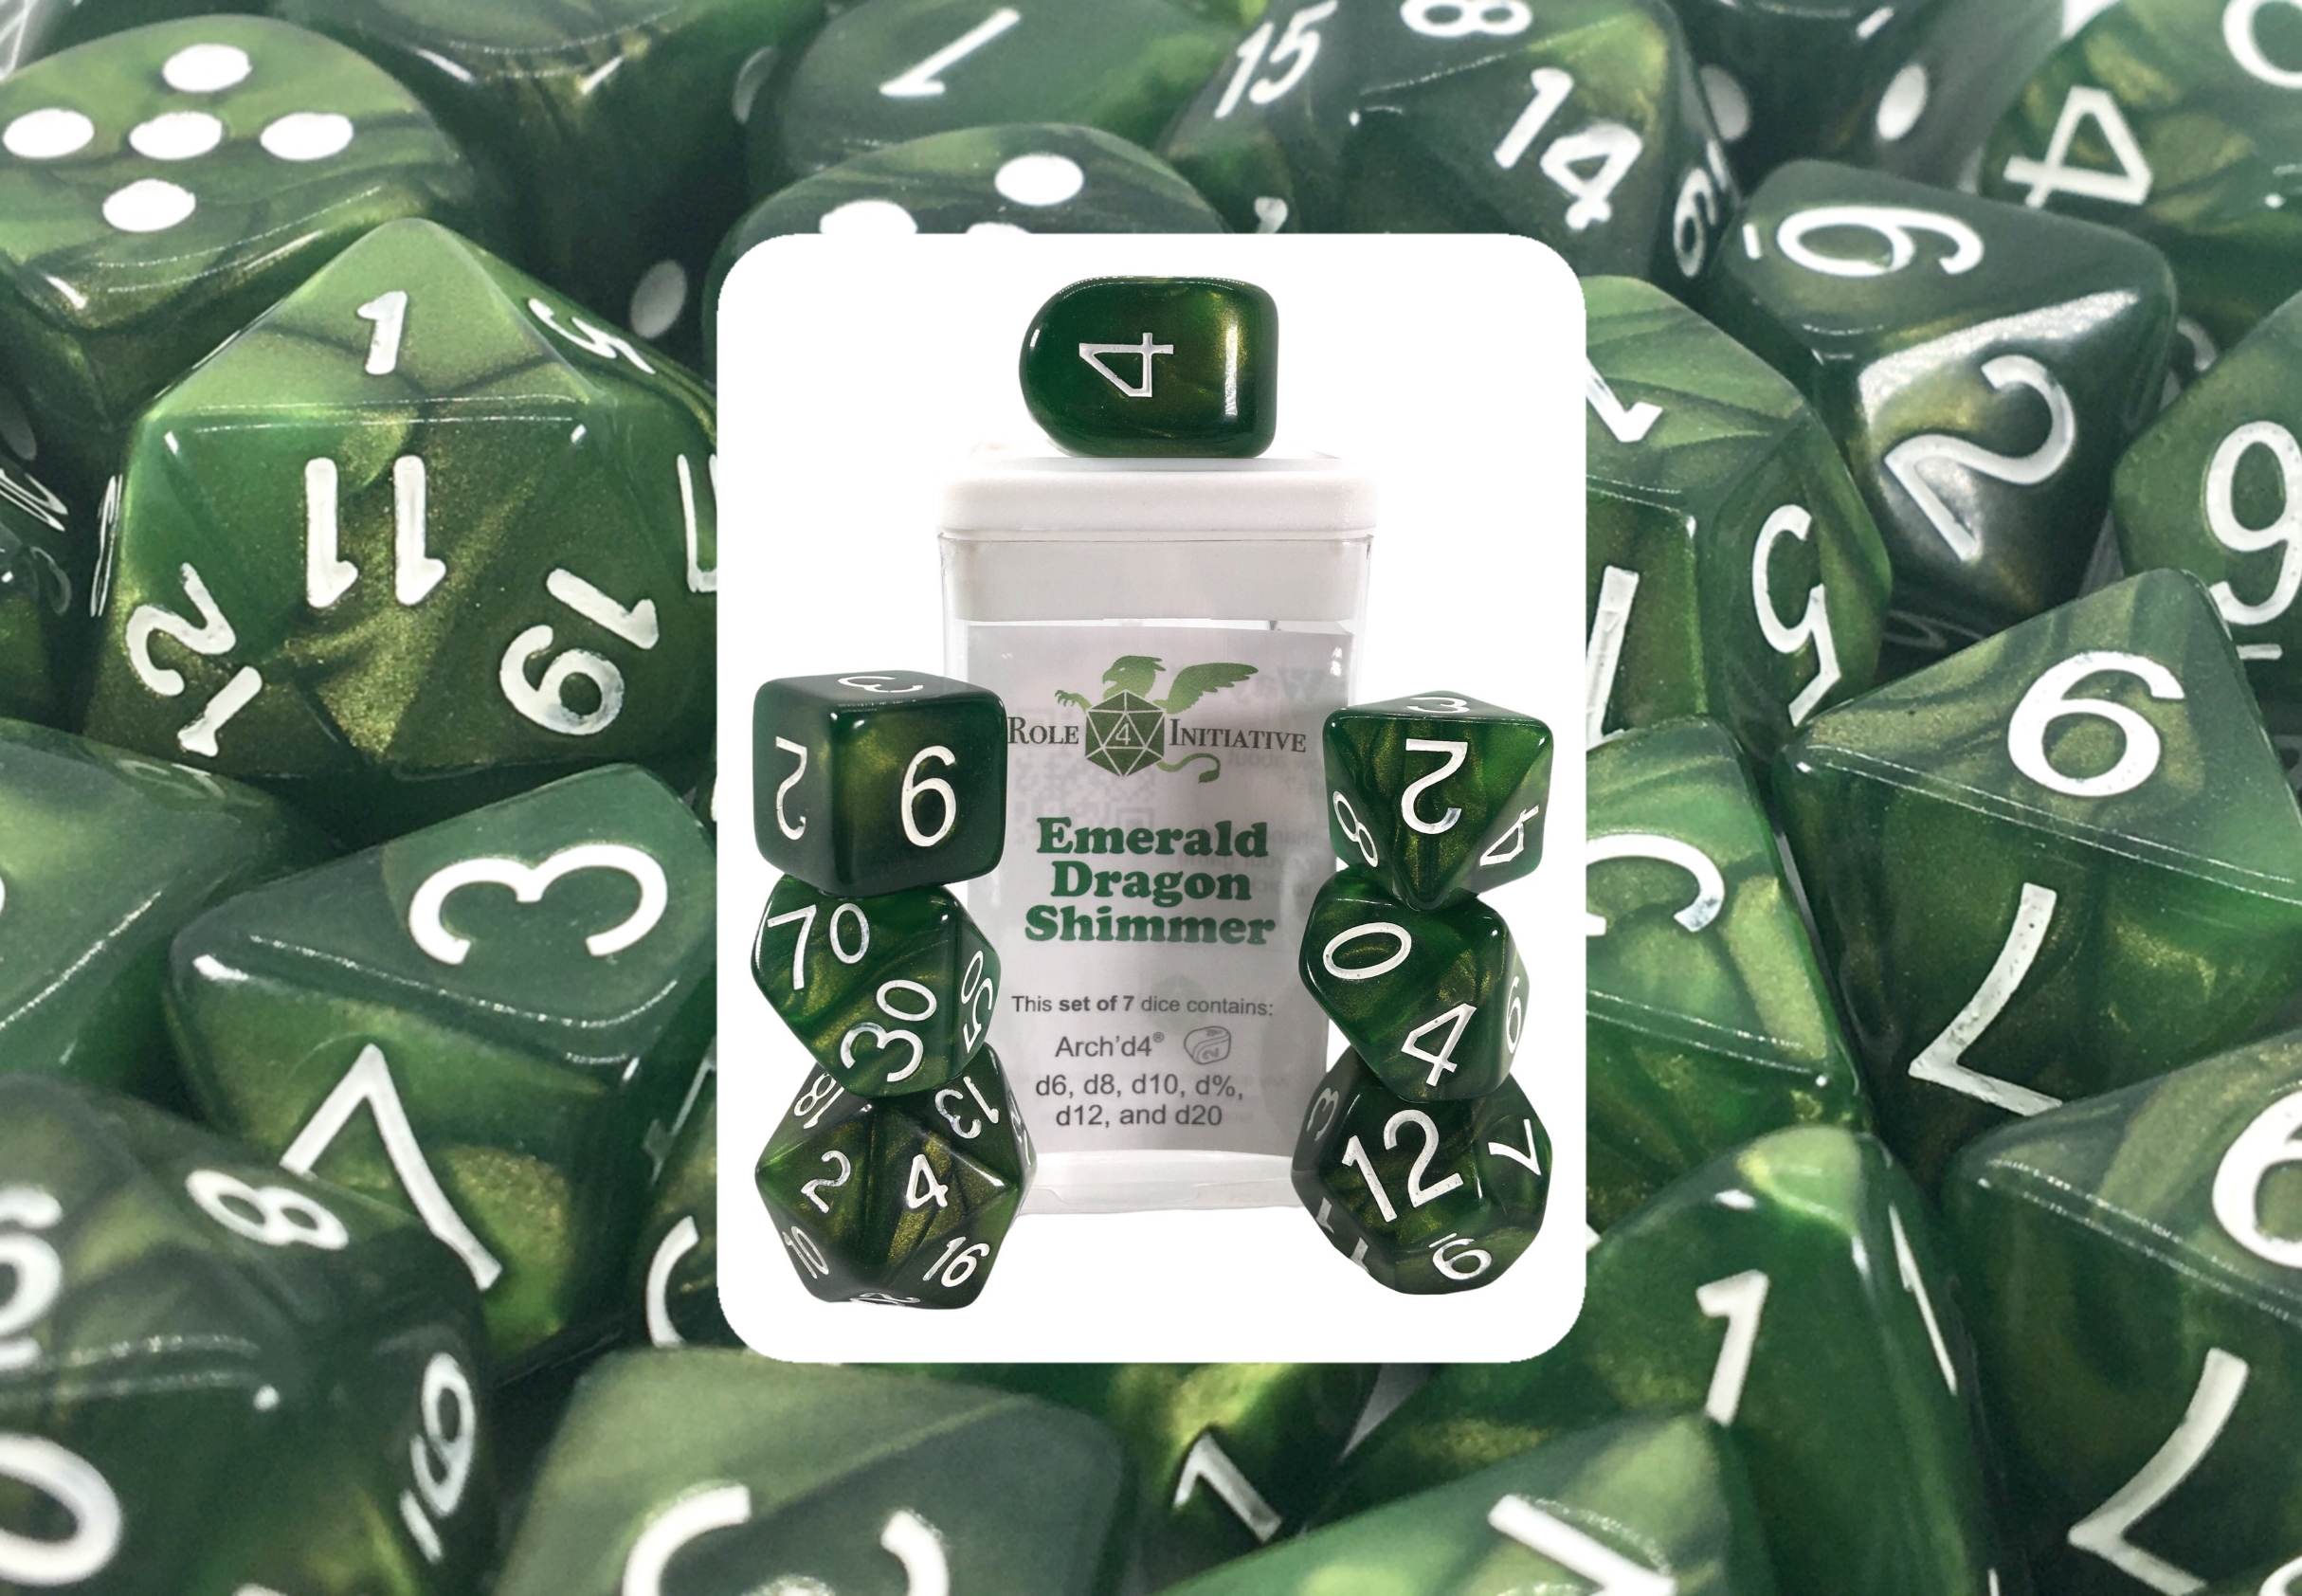 Role 4 Initiative: Polyhedral 7 Dice Set: Sea Dragon Shimmer (Arch D4) 